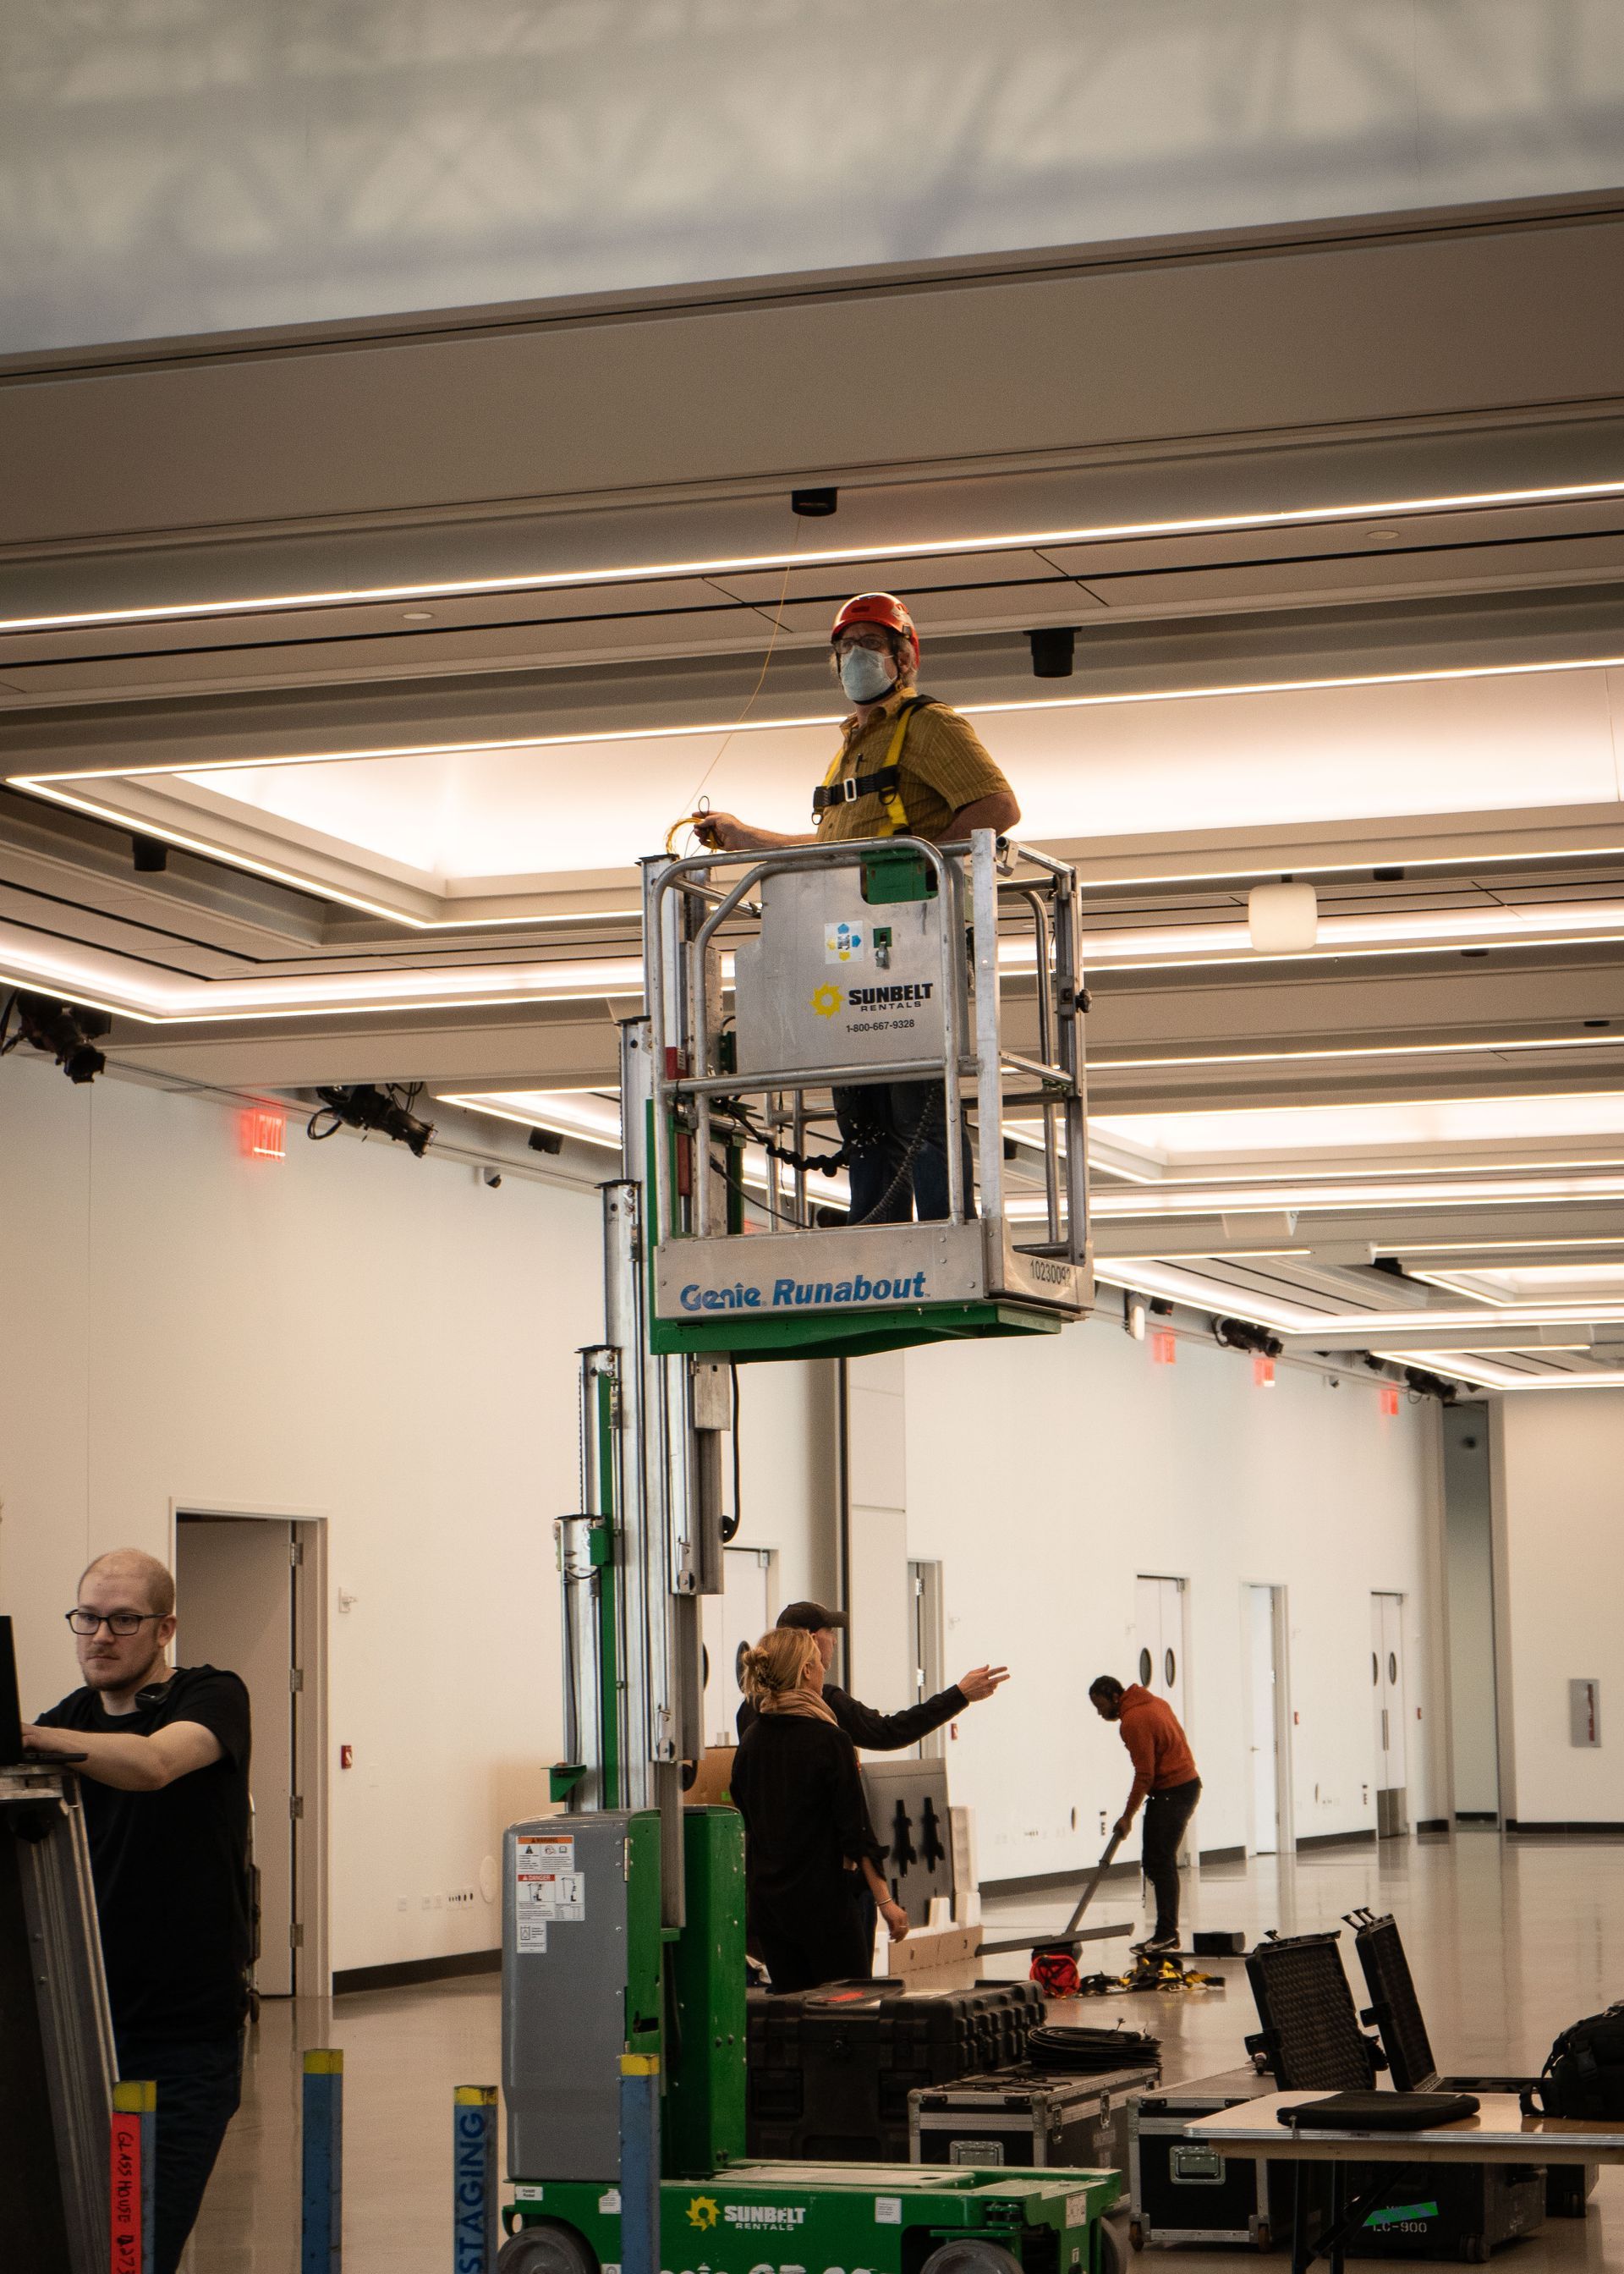 A man is standing on a lift in a large room.